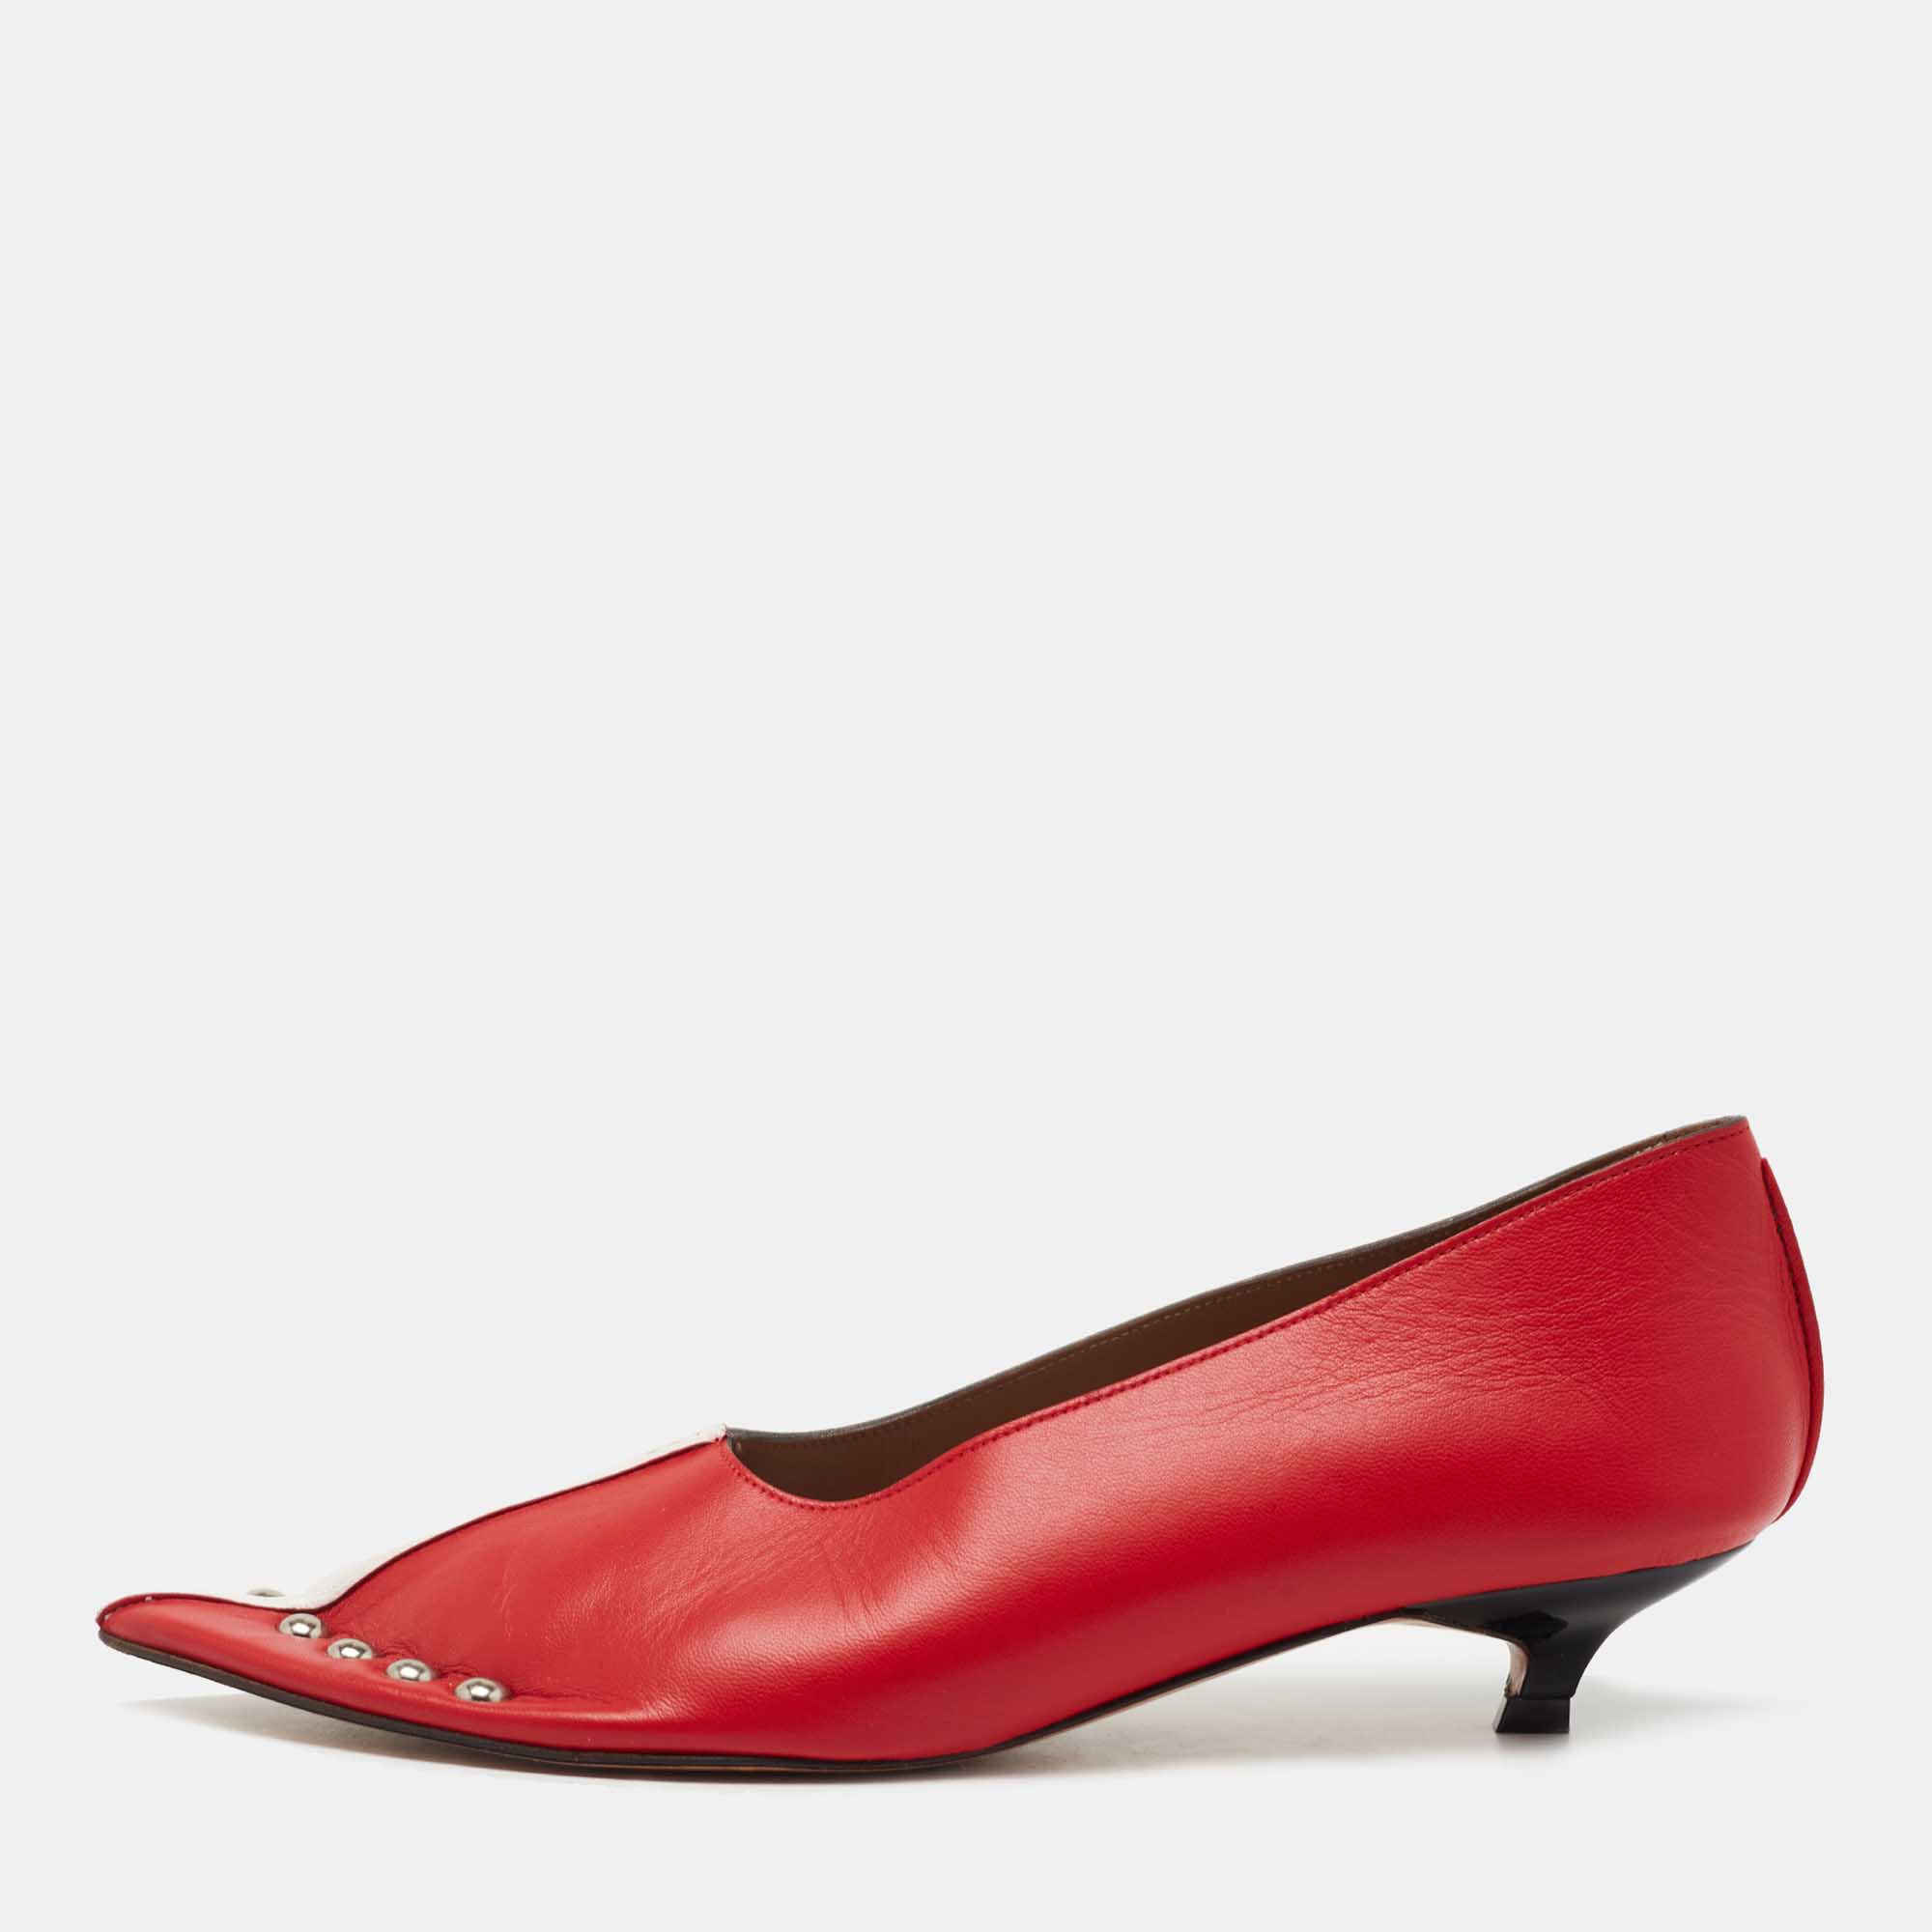 Marni Red/ White Leather Pointed Toe Pumps Size 35.5